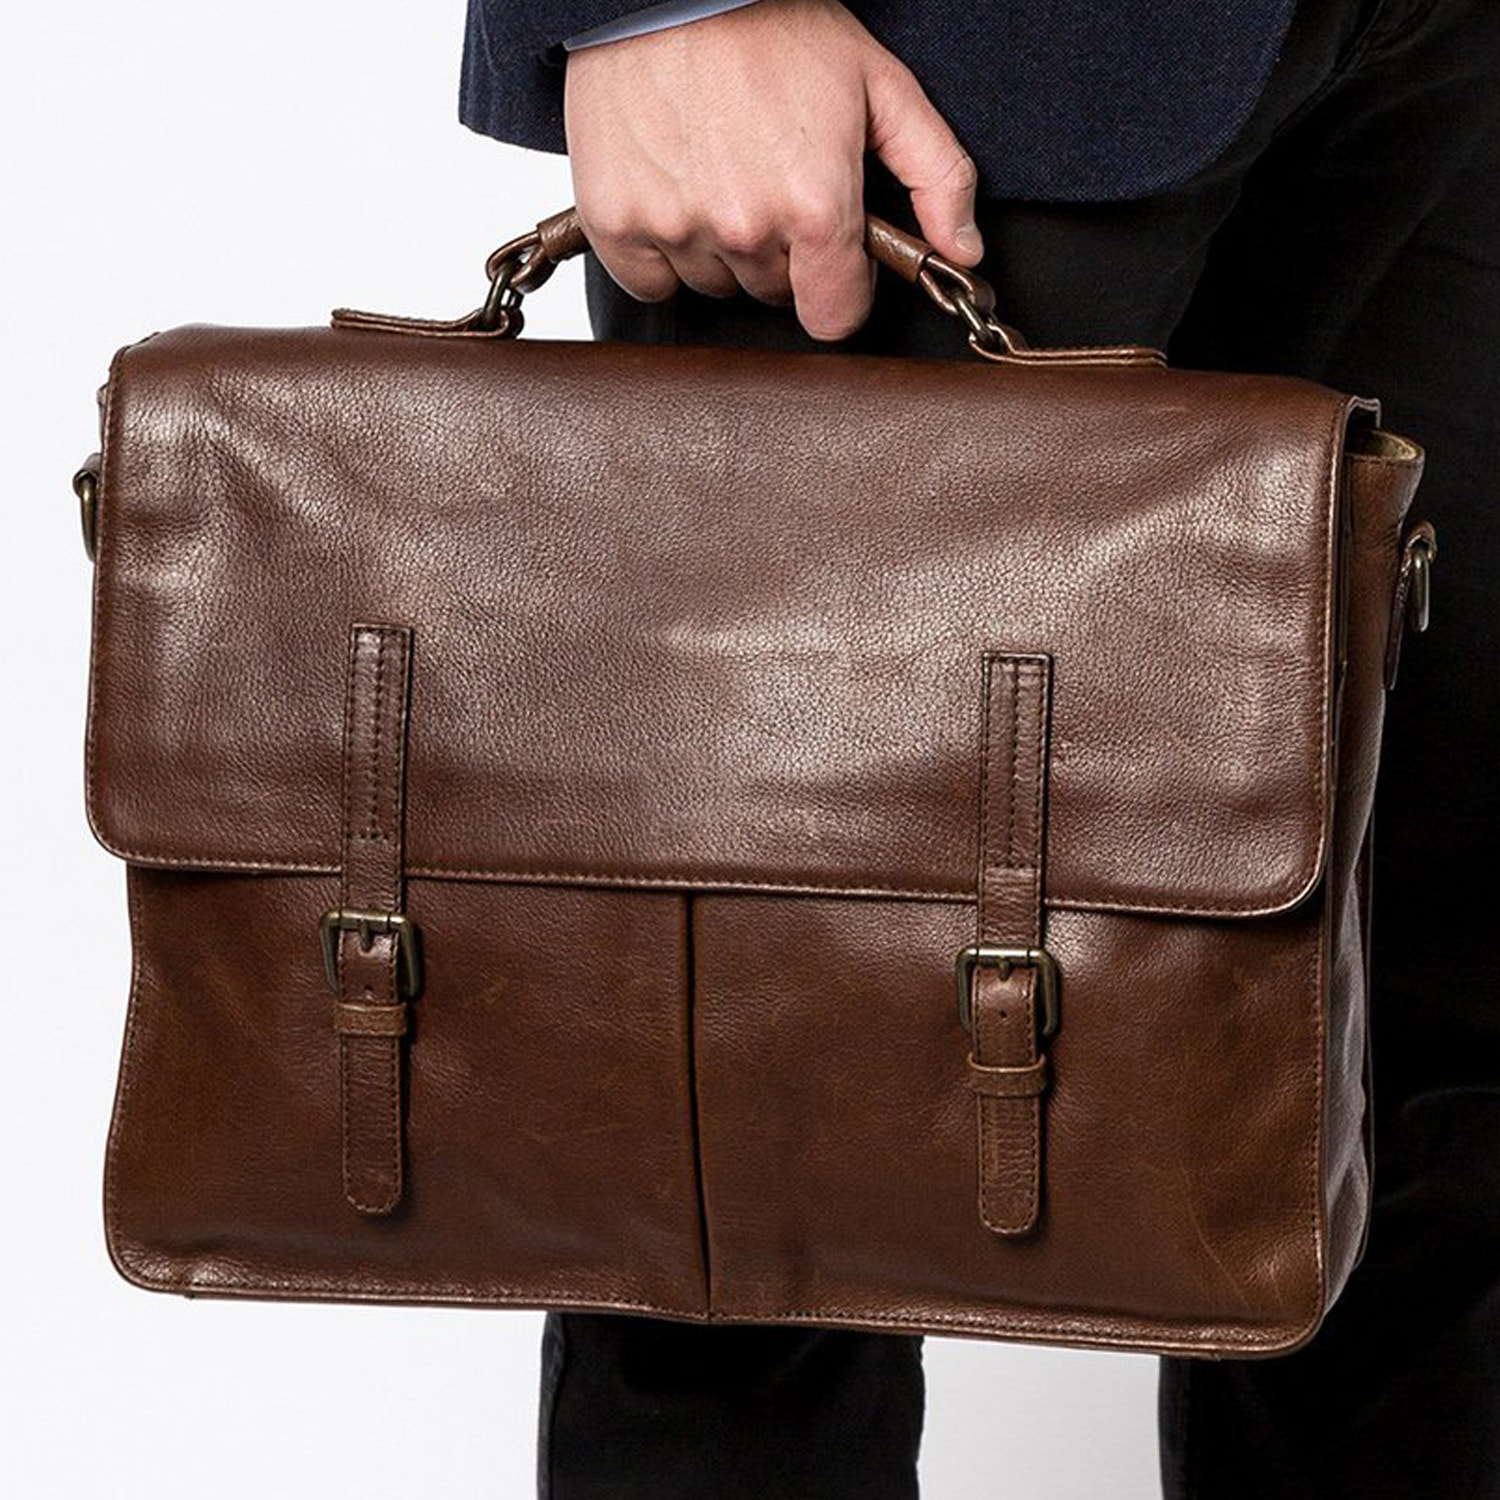 The Handbag Company have a variety of men's leather bags including ...